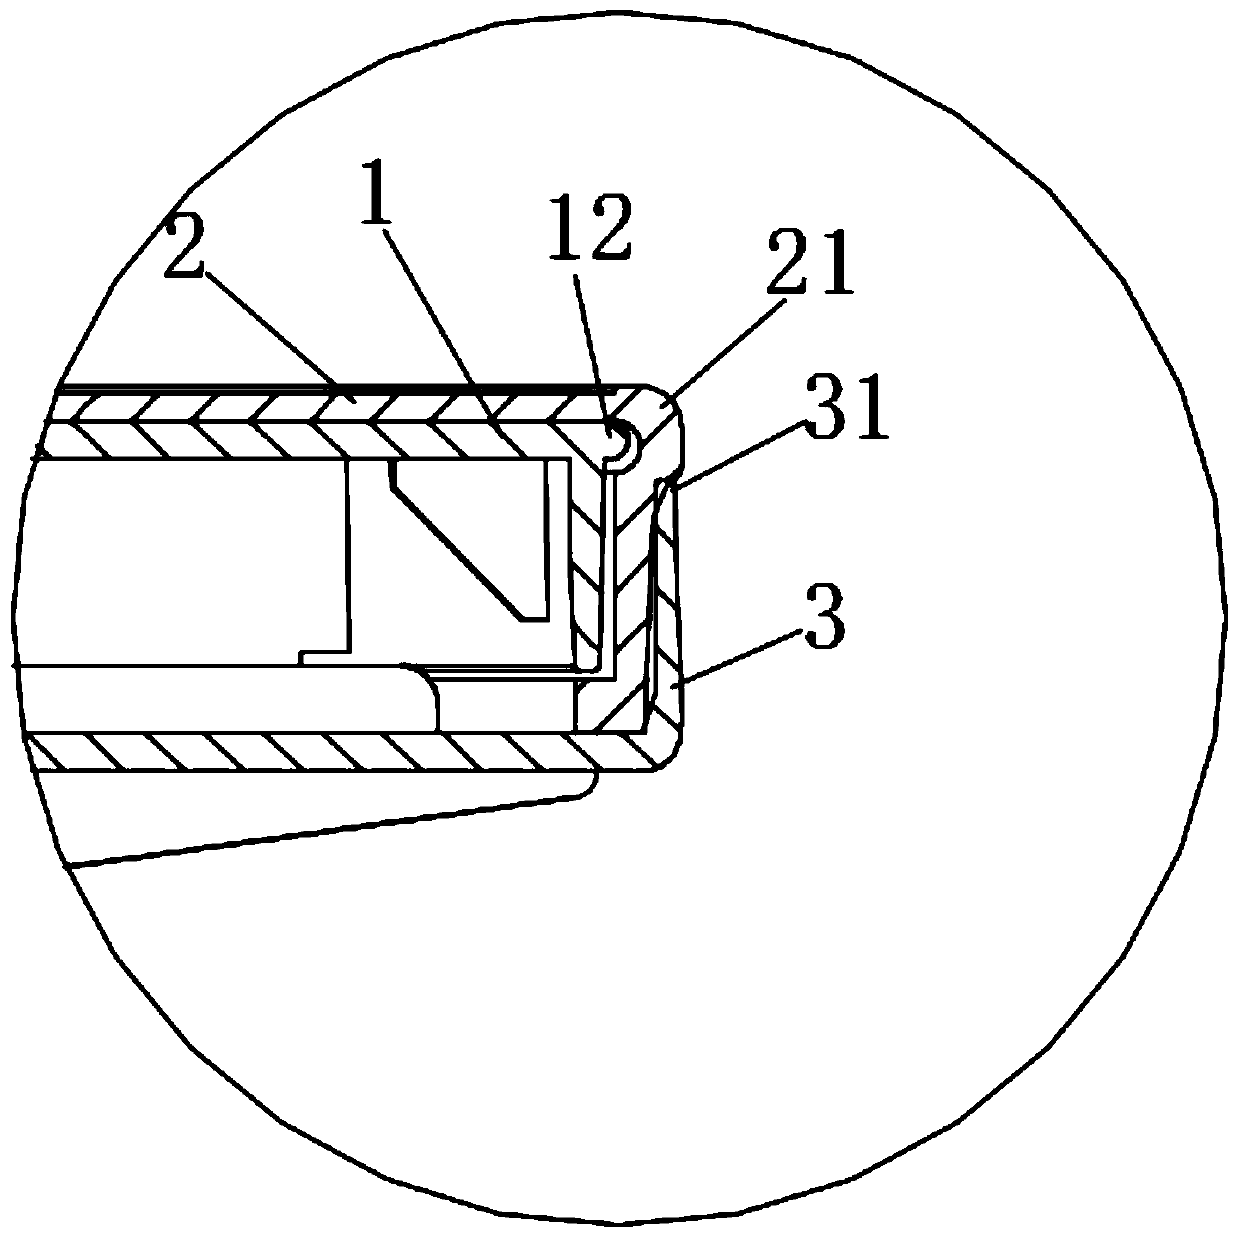 Microporous membrane disc aerator capable of being manually disassembled and assembled